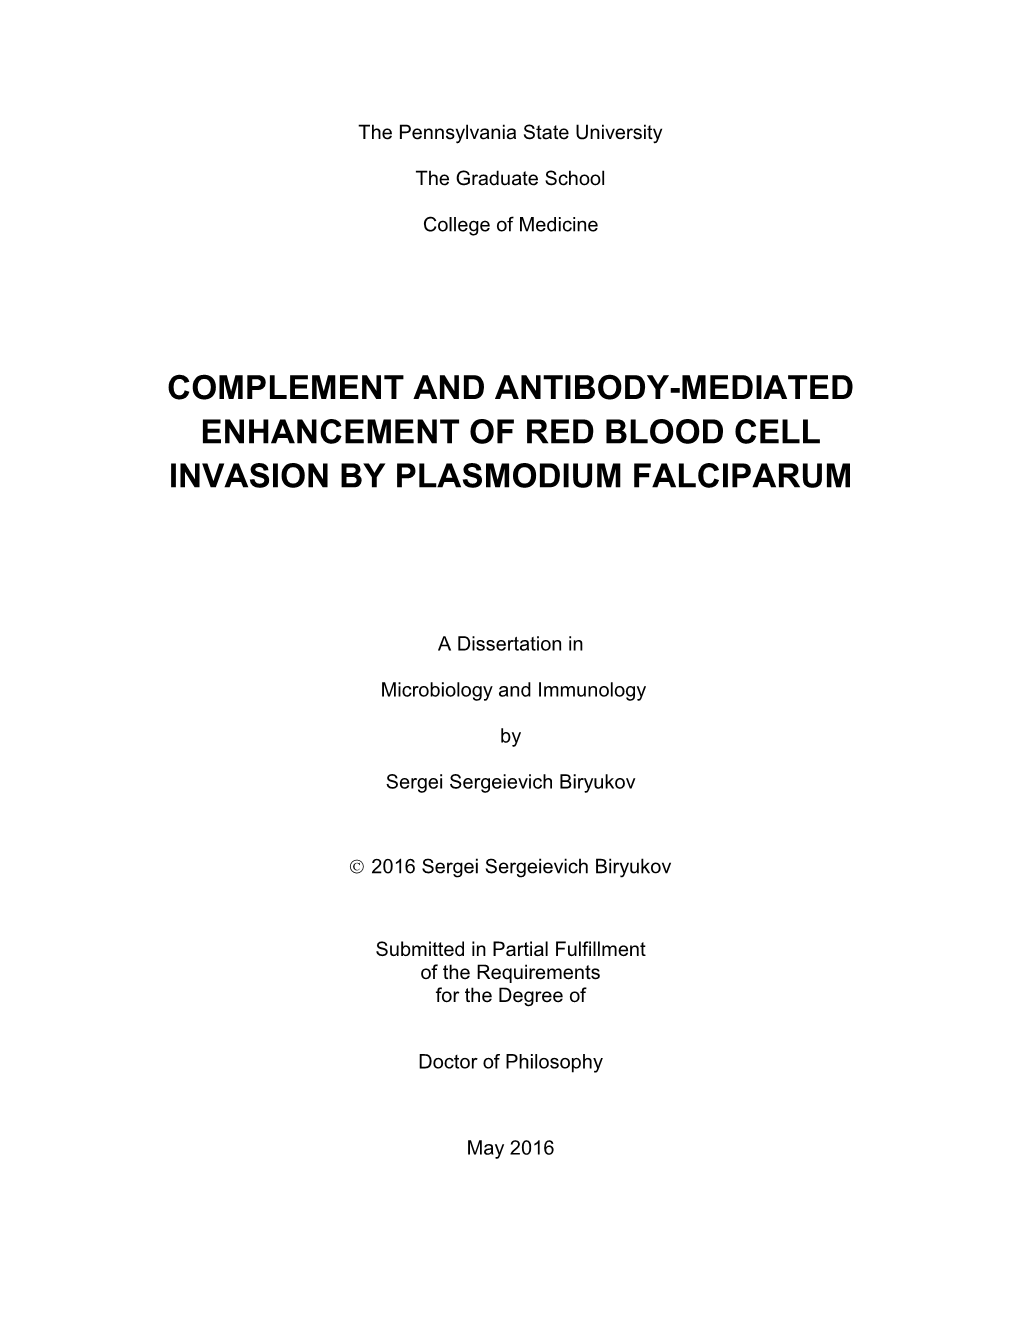 Complement and Antibody-Mediated Enhancement of Red Blood Cell Invasion by Plasmodium Falciparum